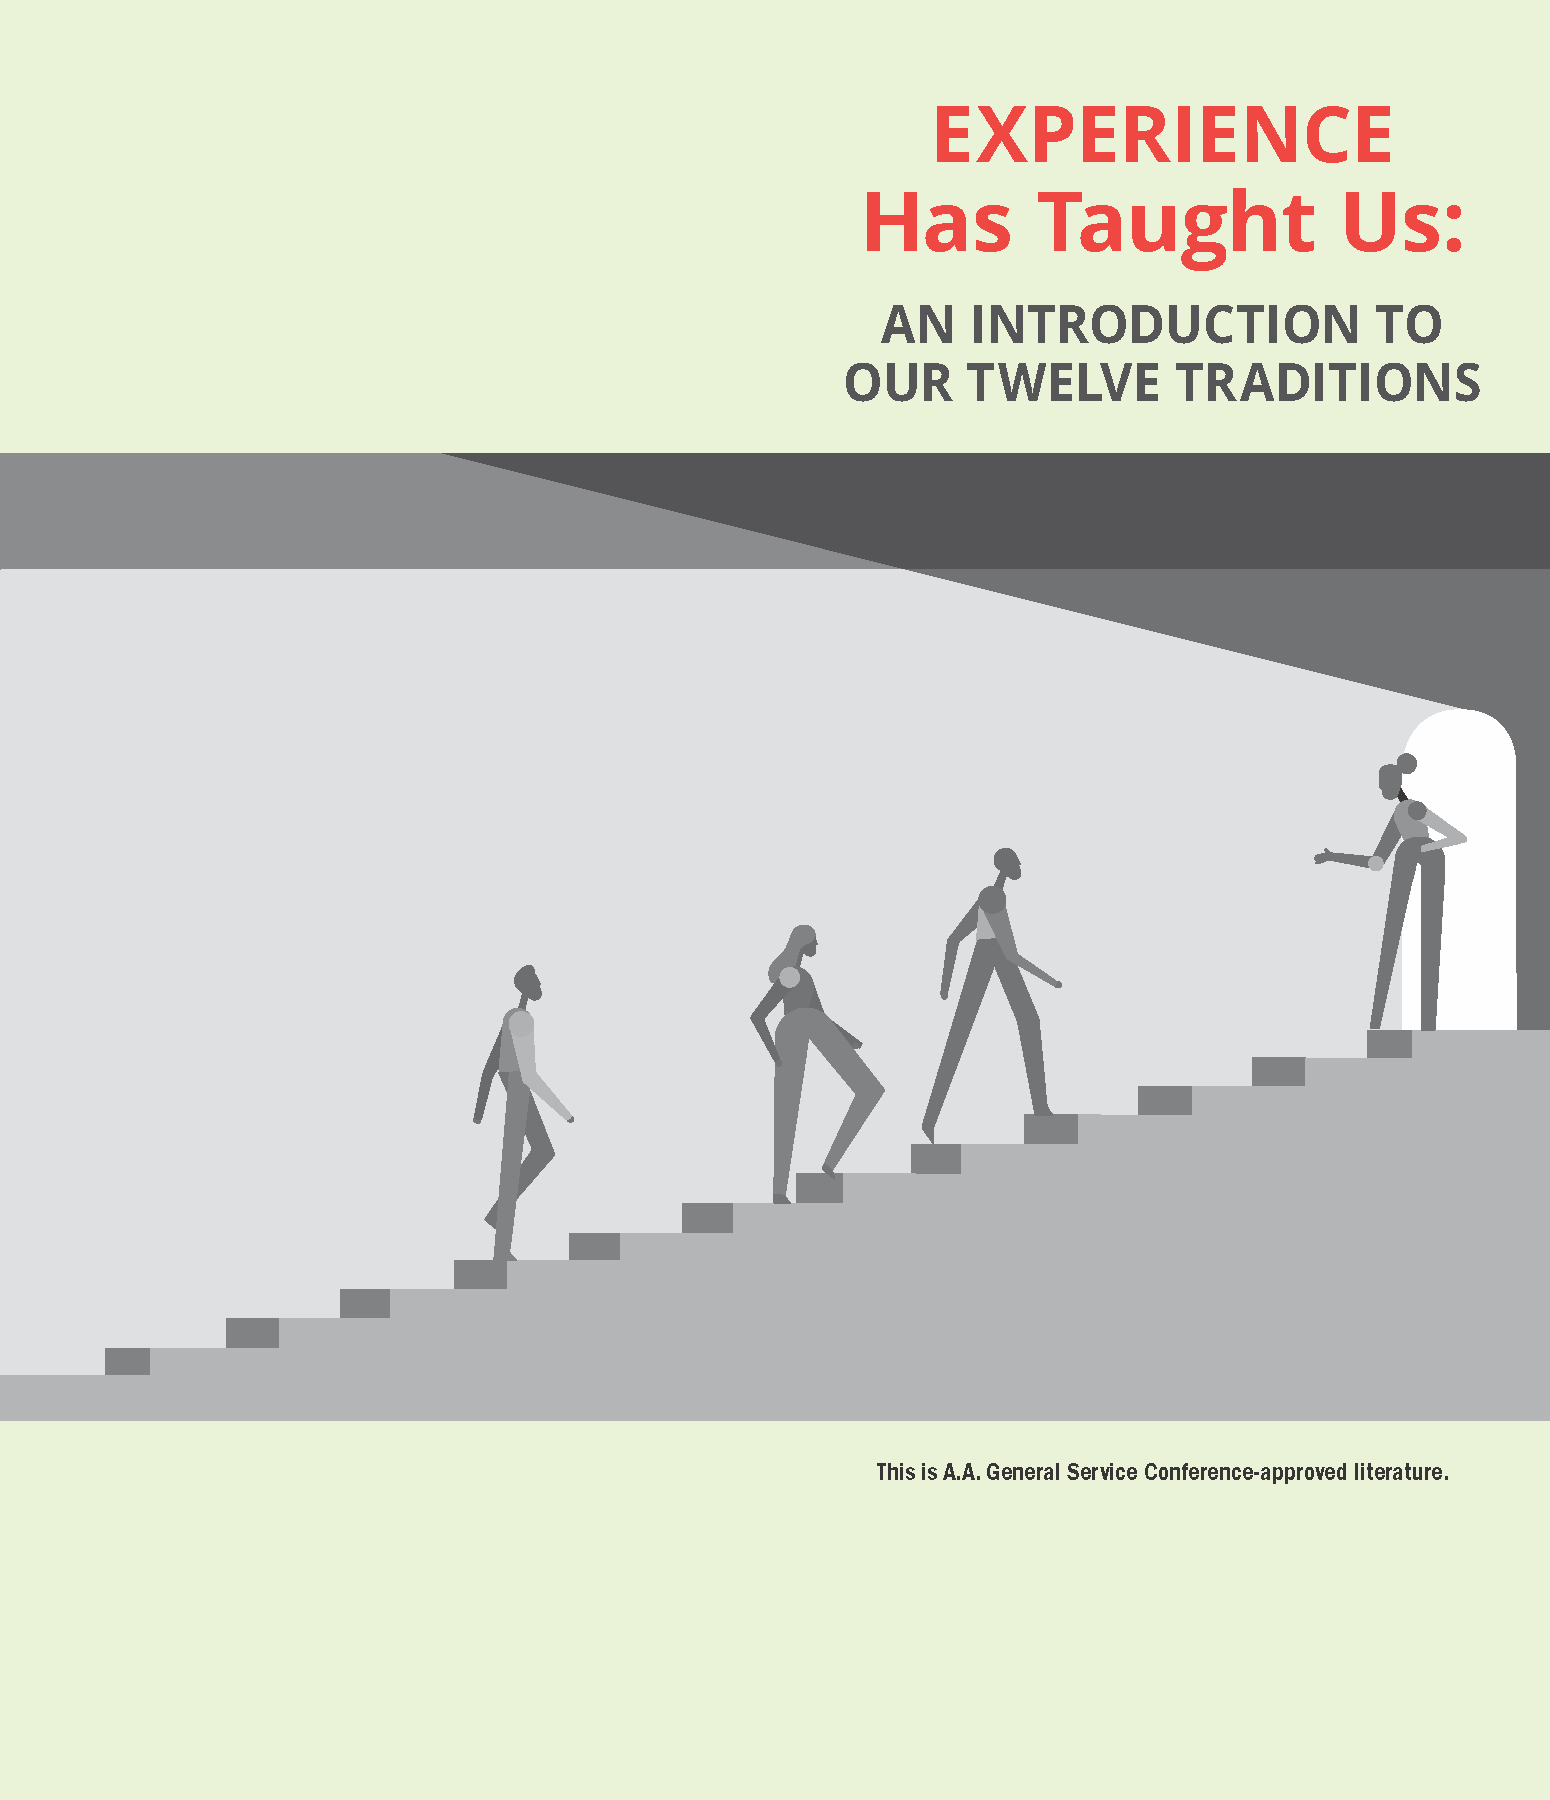 Experience Has Taught Us: An Introduction to our Twelve Traditions